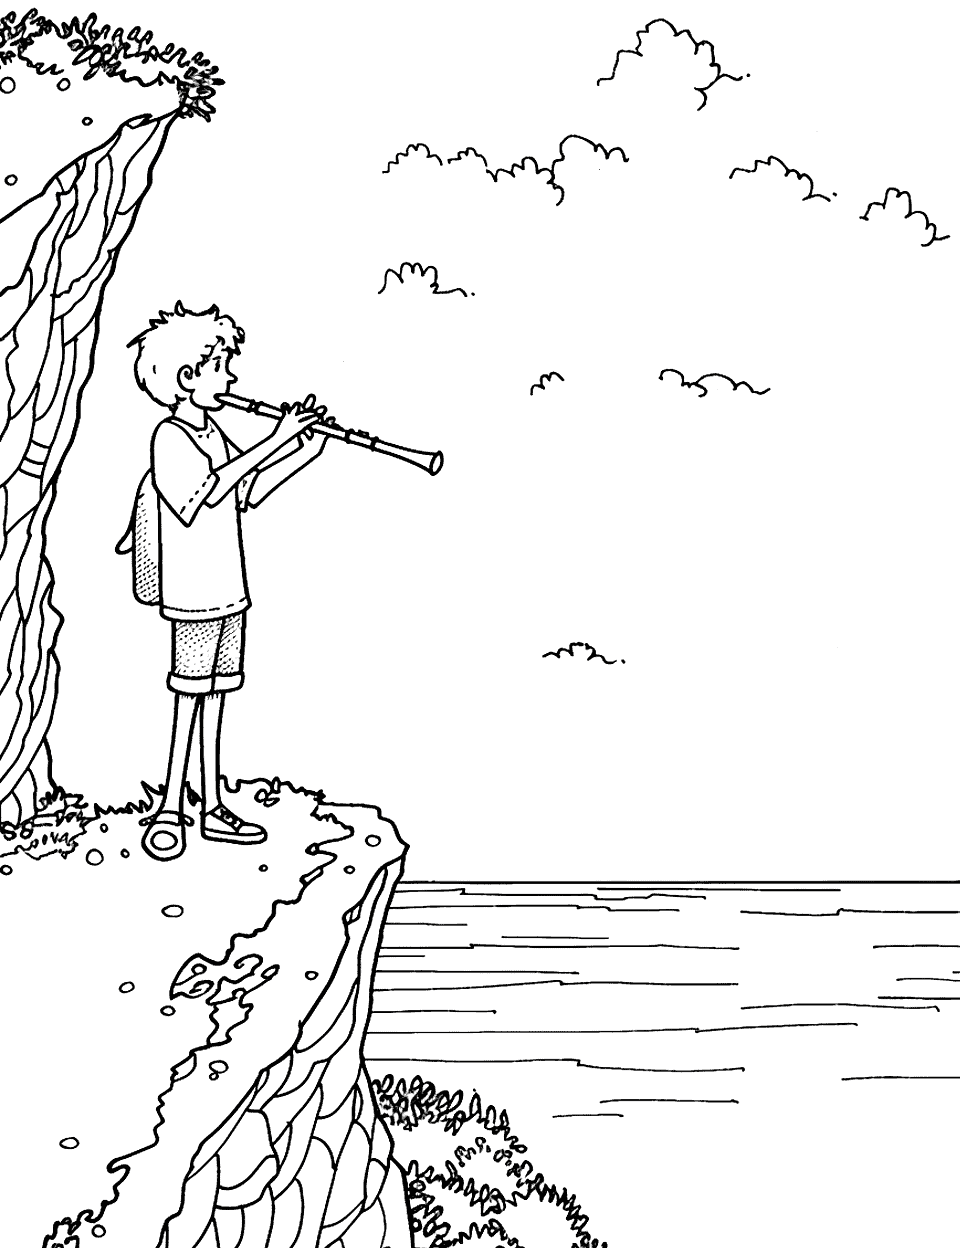 Solo Flute at the Cliff Music Coloring Page - A child playing a flute standing at the edge of a scenic cliff overlooking the sea.